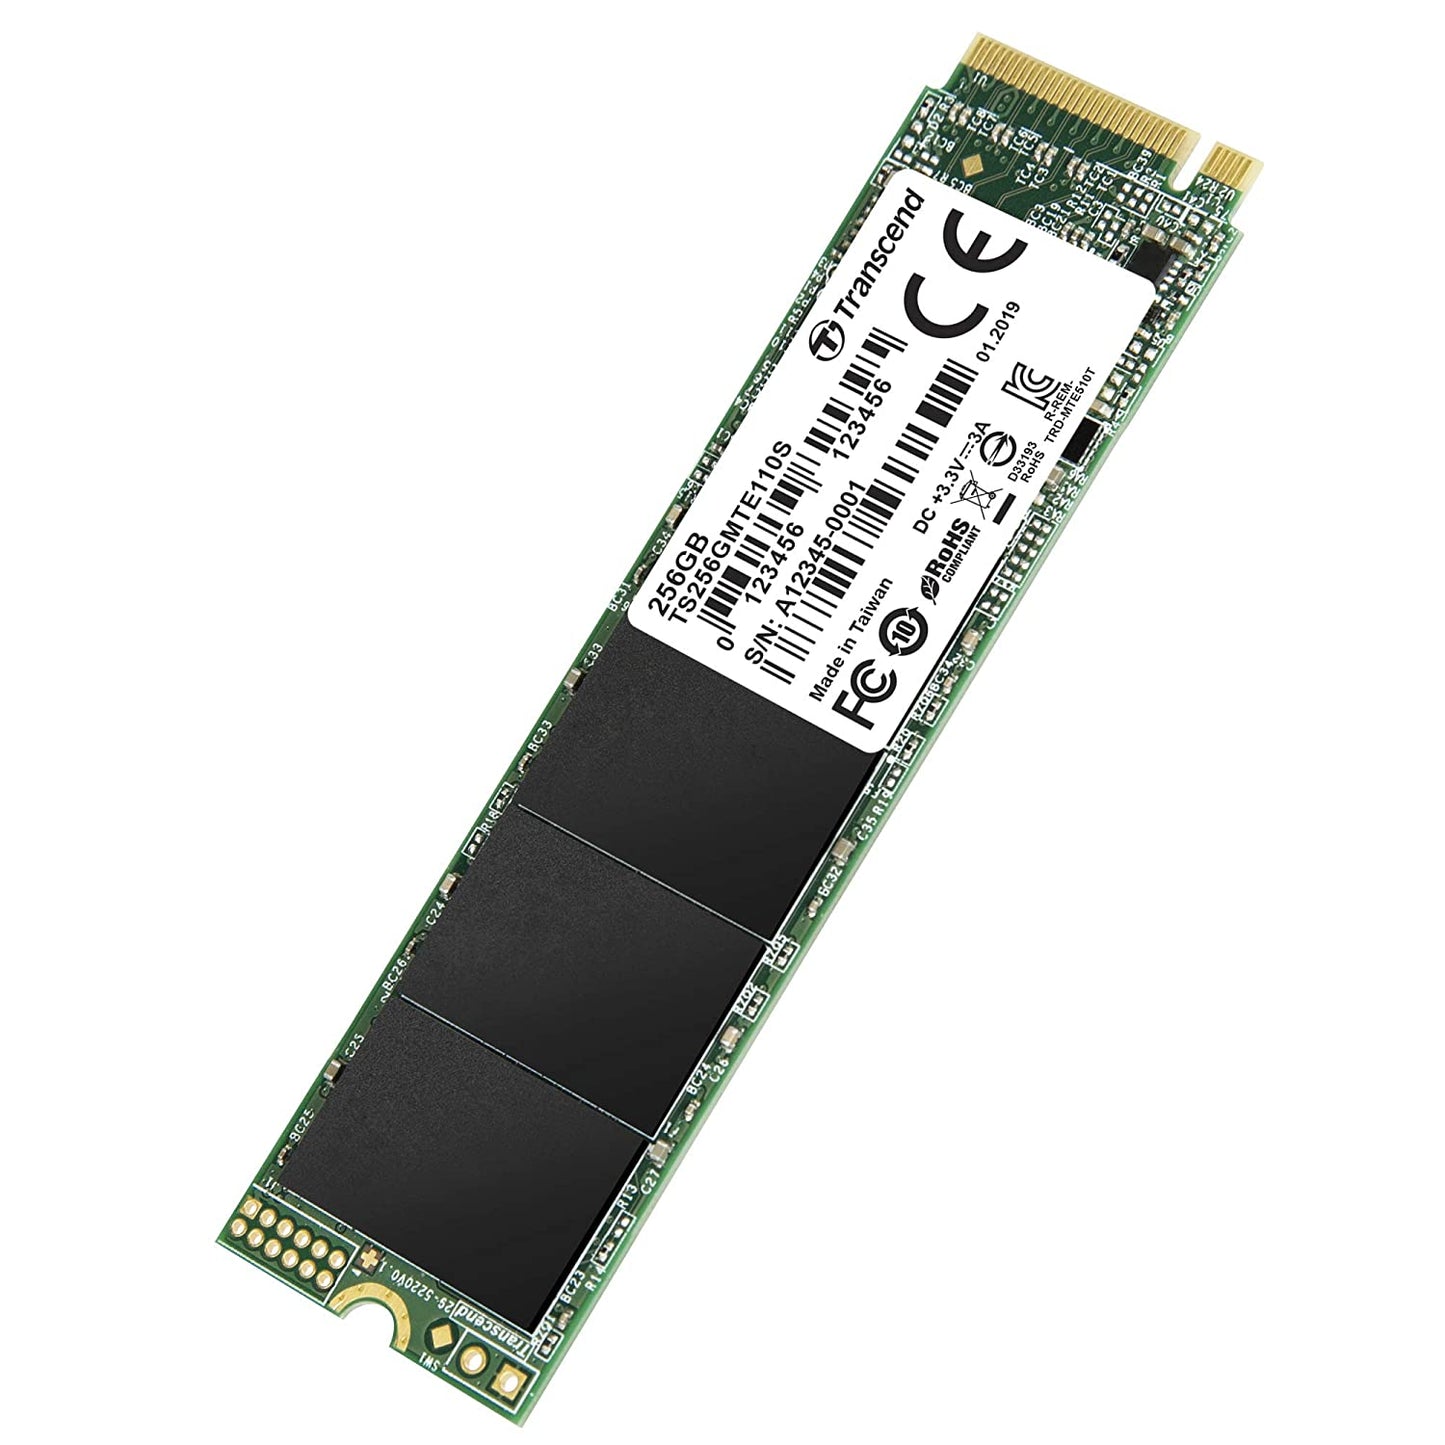 Transcend 256GB NVMe PCIe Gen3 x 4 80 mm m.2 Solid State Drive (TS256GMTE110S)